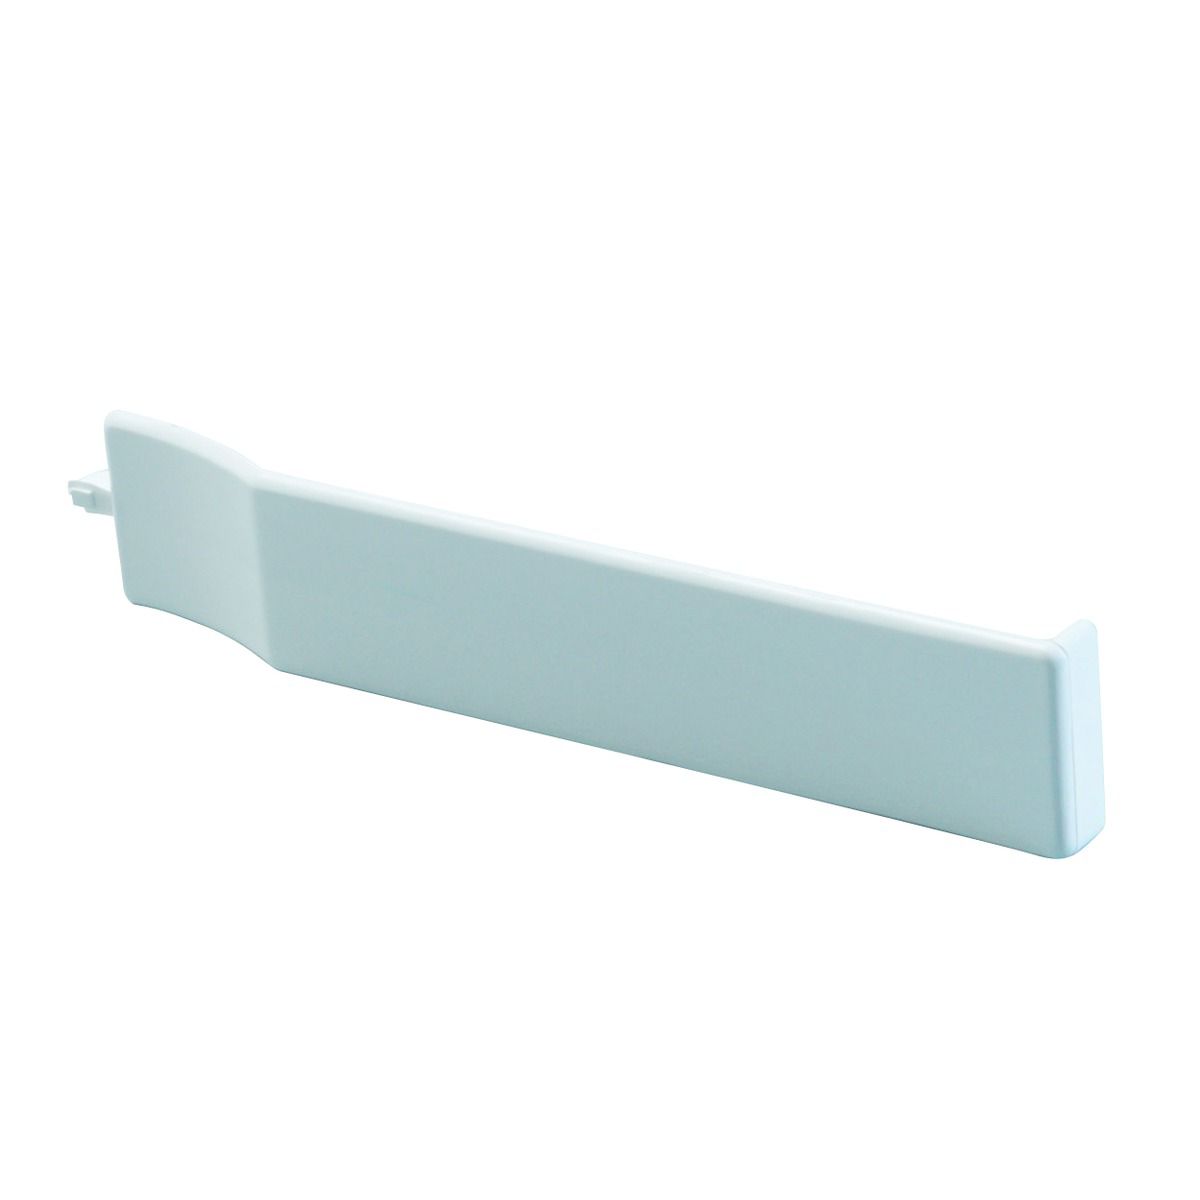 Image of Wickes PVCu External Cladding Butt Joint Trim - White 450mm Pack of 10